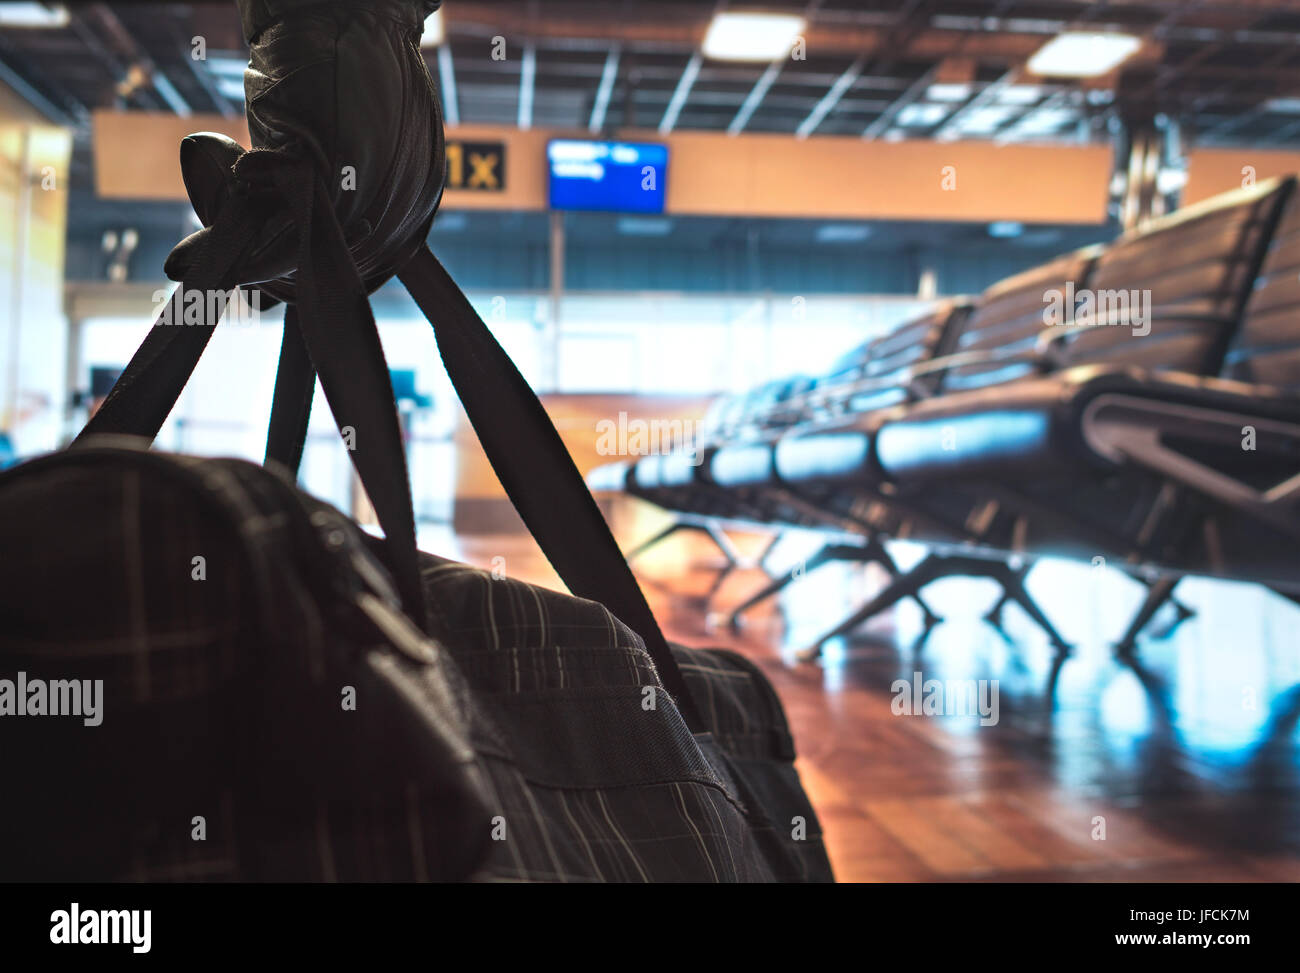 Terrorist in airport planning a bomb attack. Terrorism and security threat concept. Suspicious dangerous man in the shadows with black bag. Stock Photo